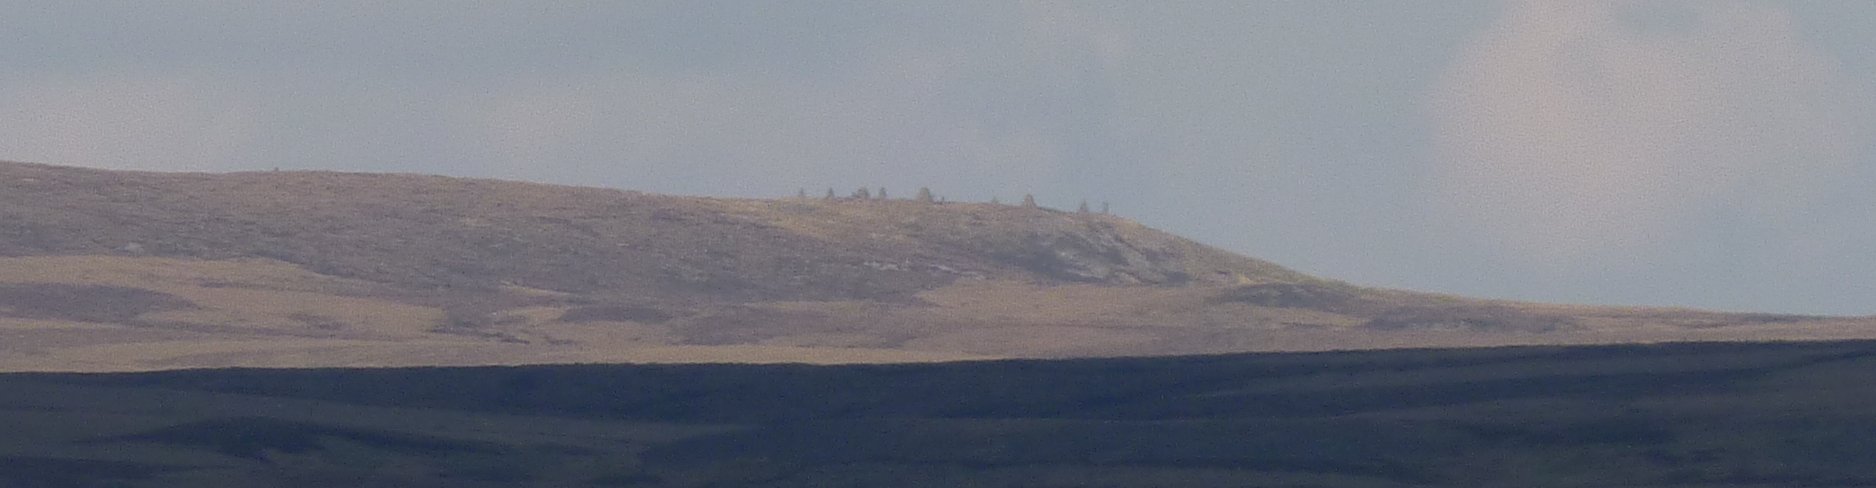 Nine Standards Rigg, just about visible from the path to Tan Hill